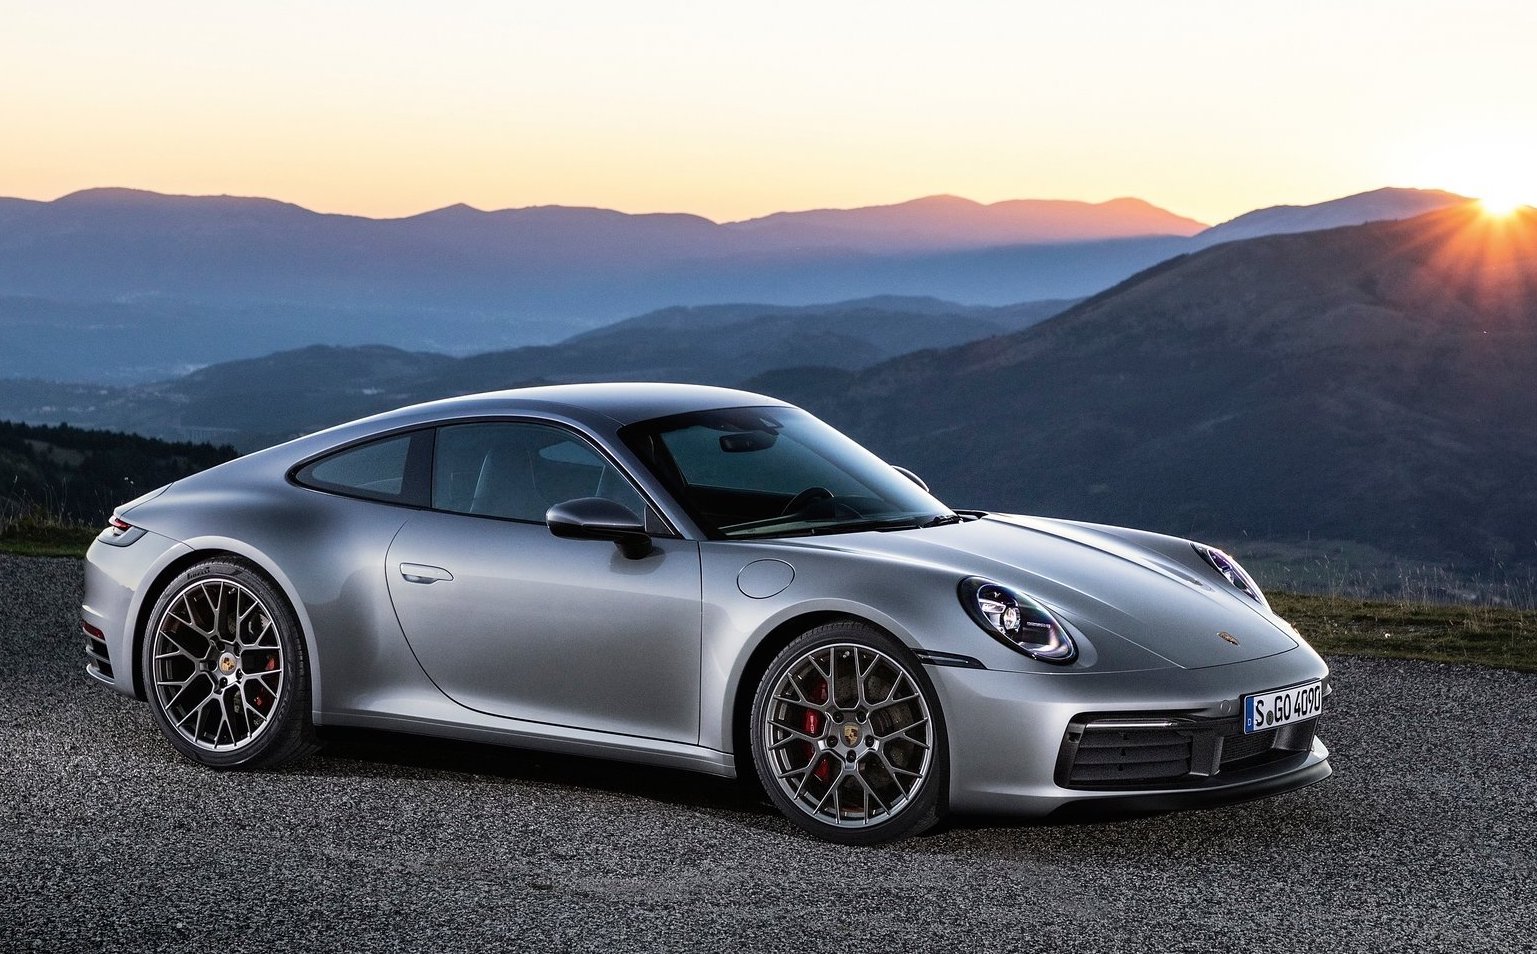 2019 Porsche 911 officially revealed in Carrera S form